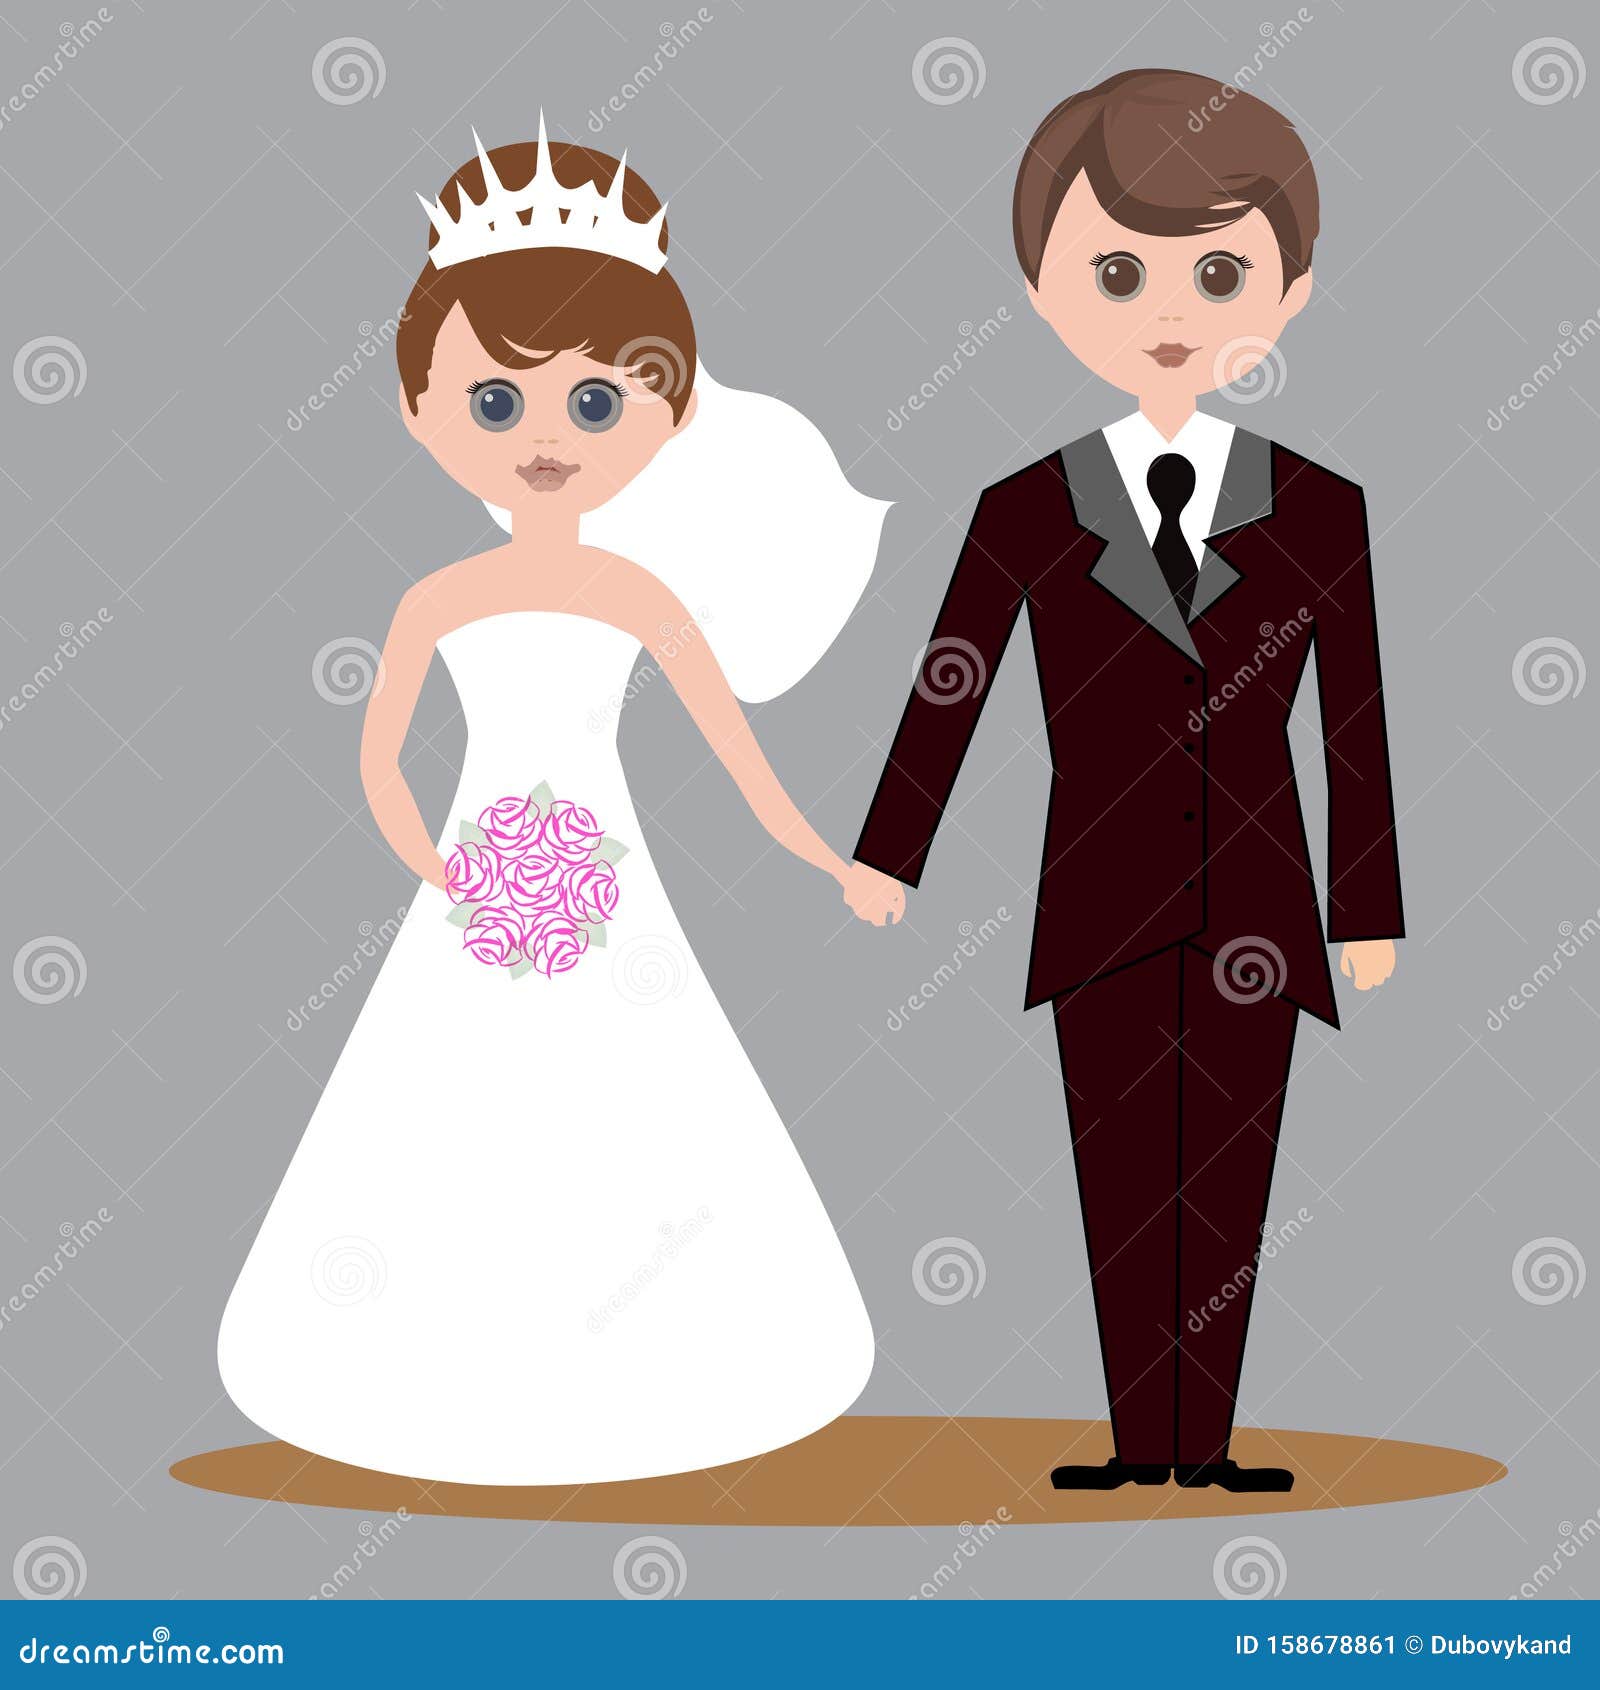 https://thumbs.dreamstime.com/z/couple-love-their-wedding-day-cartoon-vector-icon-just-married-holding-hands-pretty-girl-dress-handsome-boy-suit-character-158678861.jpg